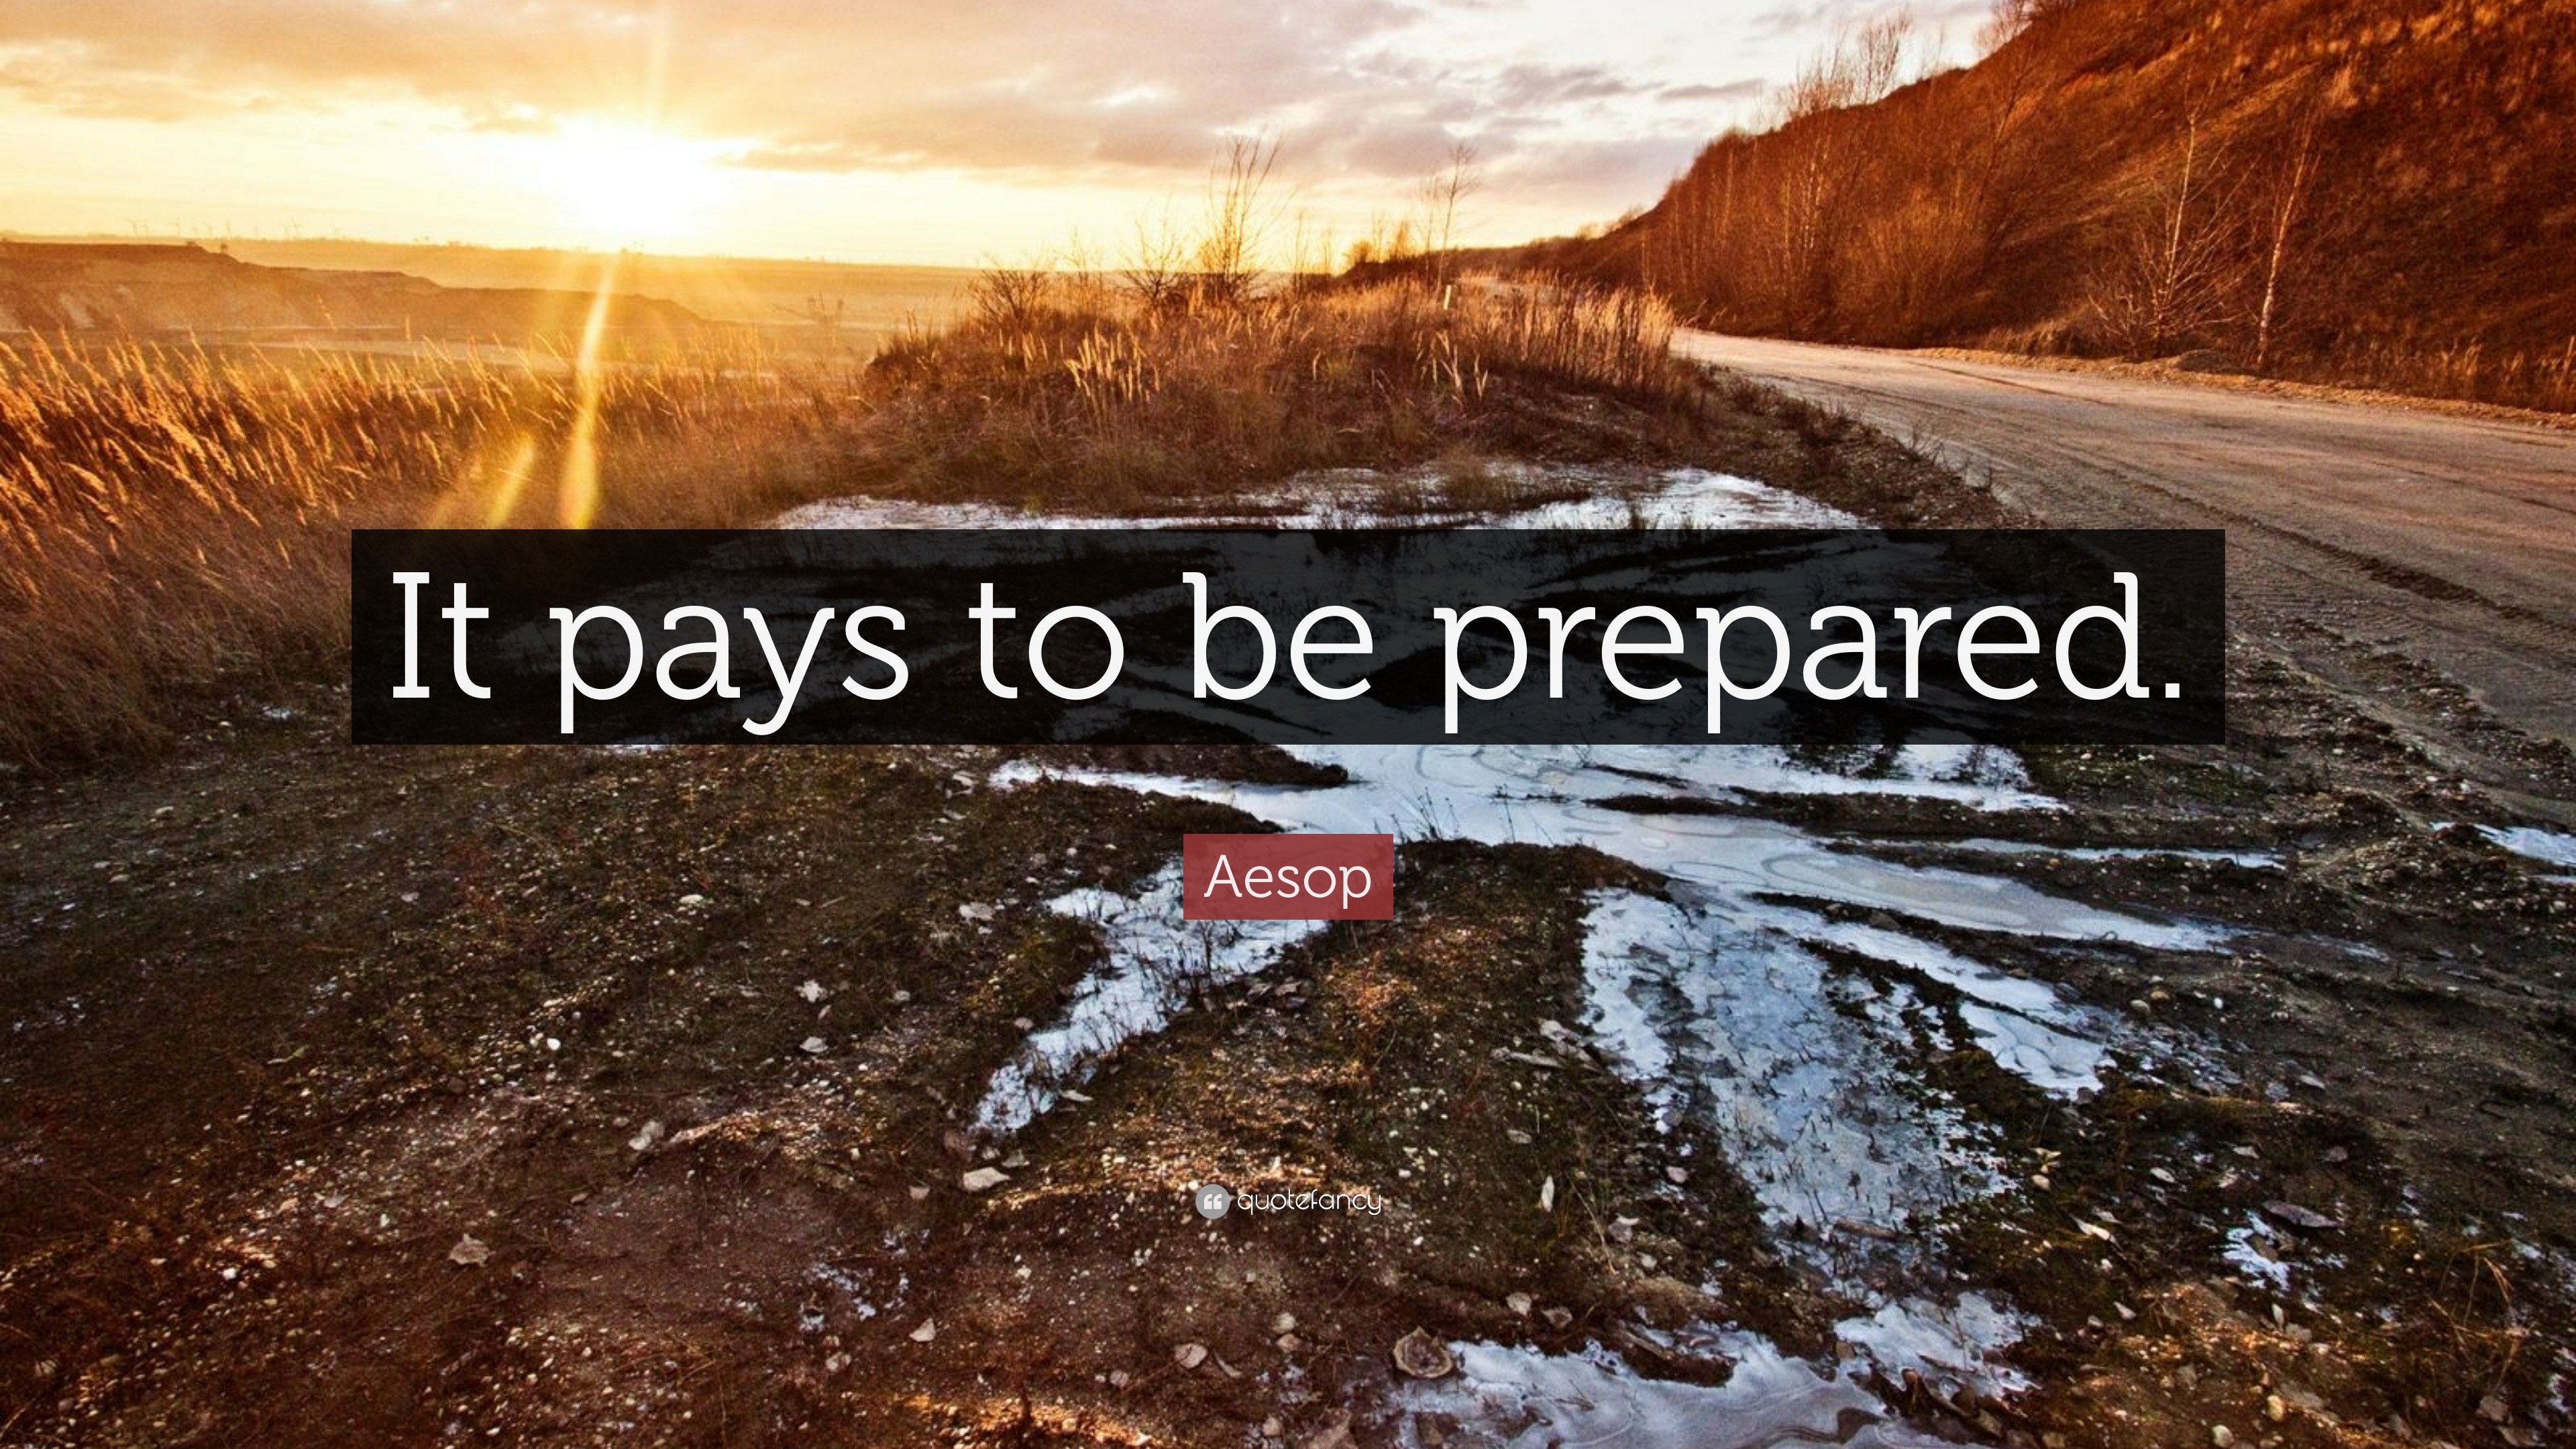 aesop-quote-it-pays-to-be-prepared